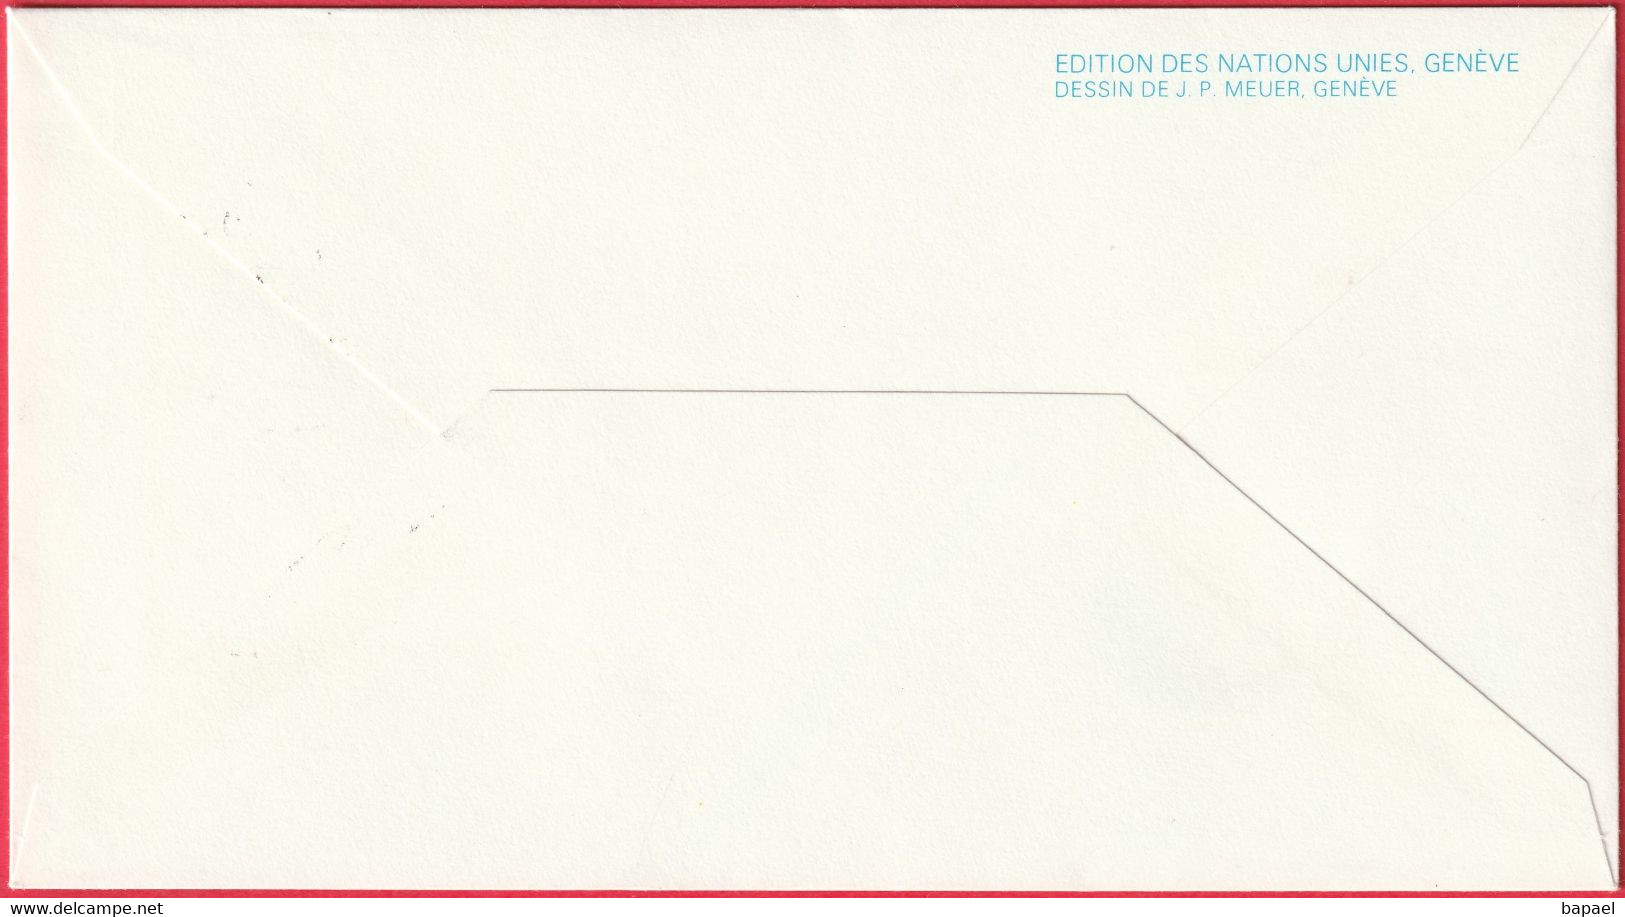 FDC - Enveloppe - Nations Unies - (New-York) (11-1-80) - New International Economic Order (1) (Recto-Verso) - Covers & Documents